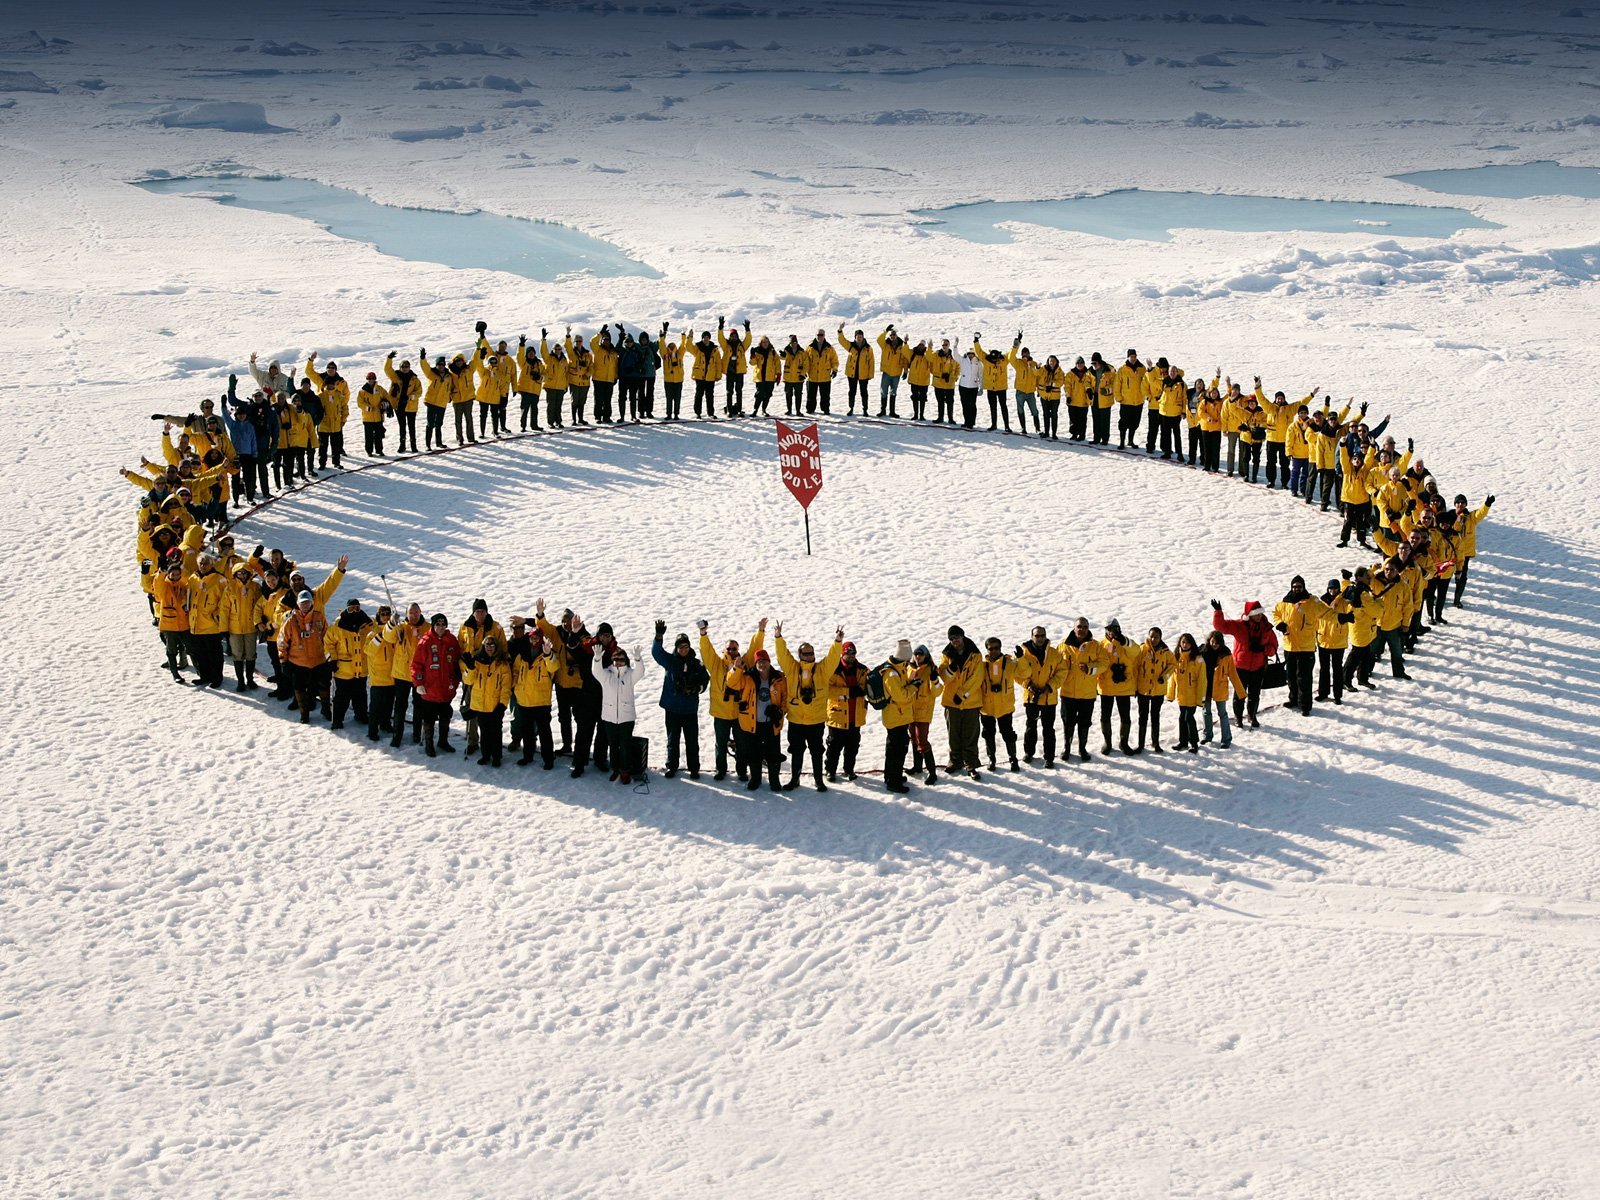 Reaching the North Pole is a powerful rite of passage to be celebrated!